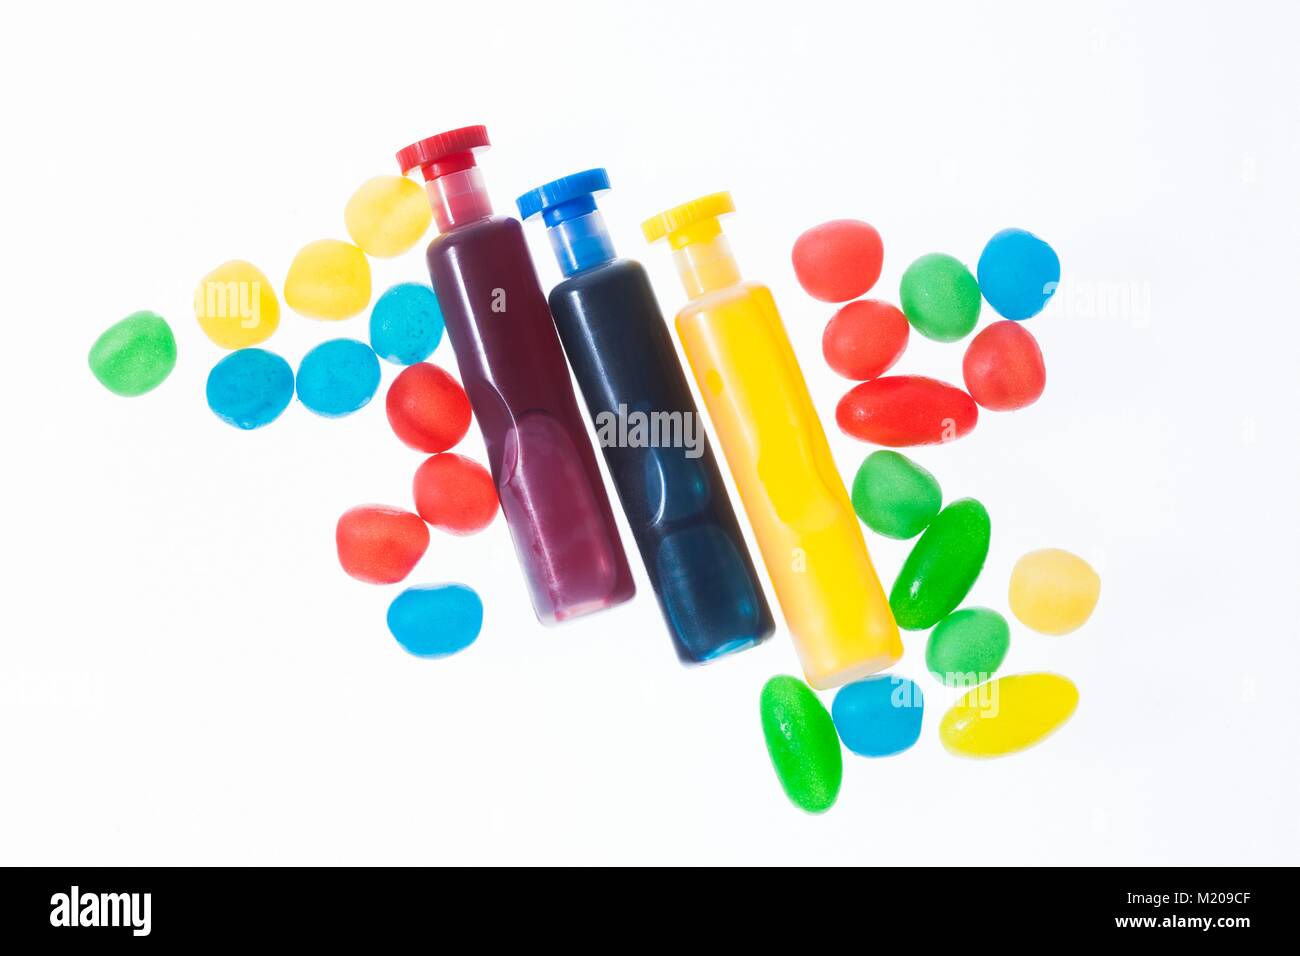 Three containers with red, blue and yellow liquid spots, studio shot. Stock Photo